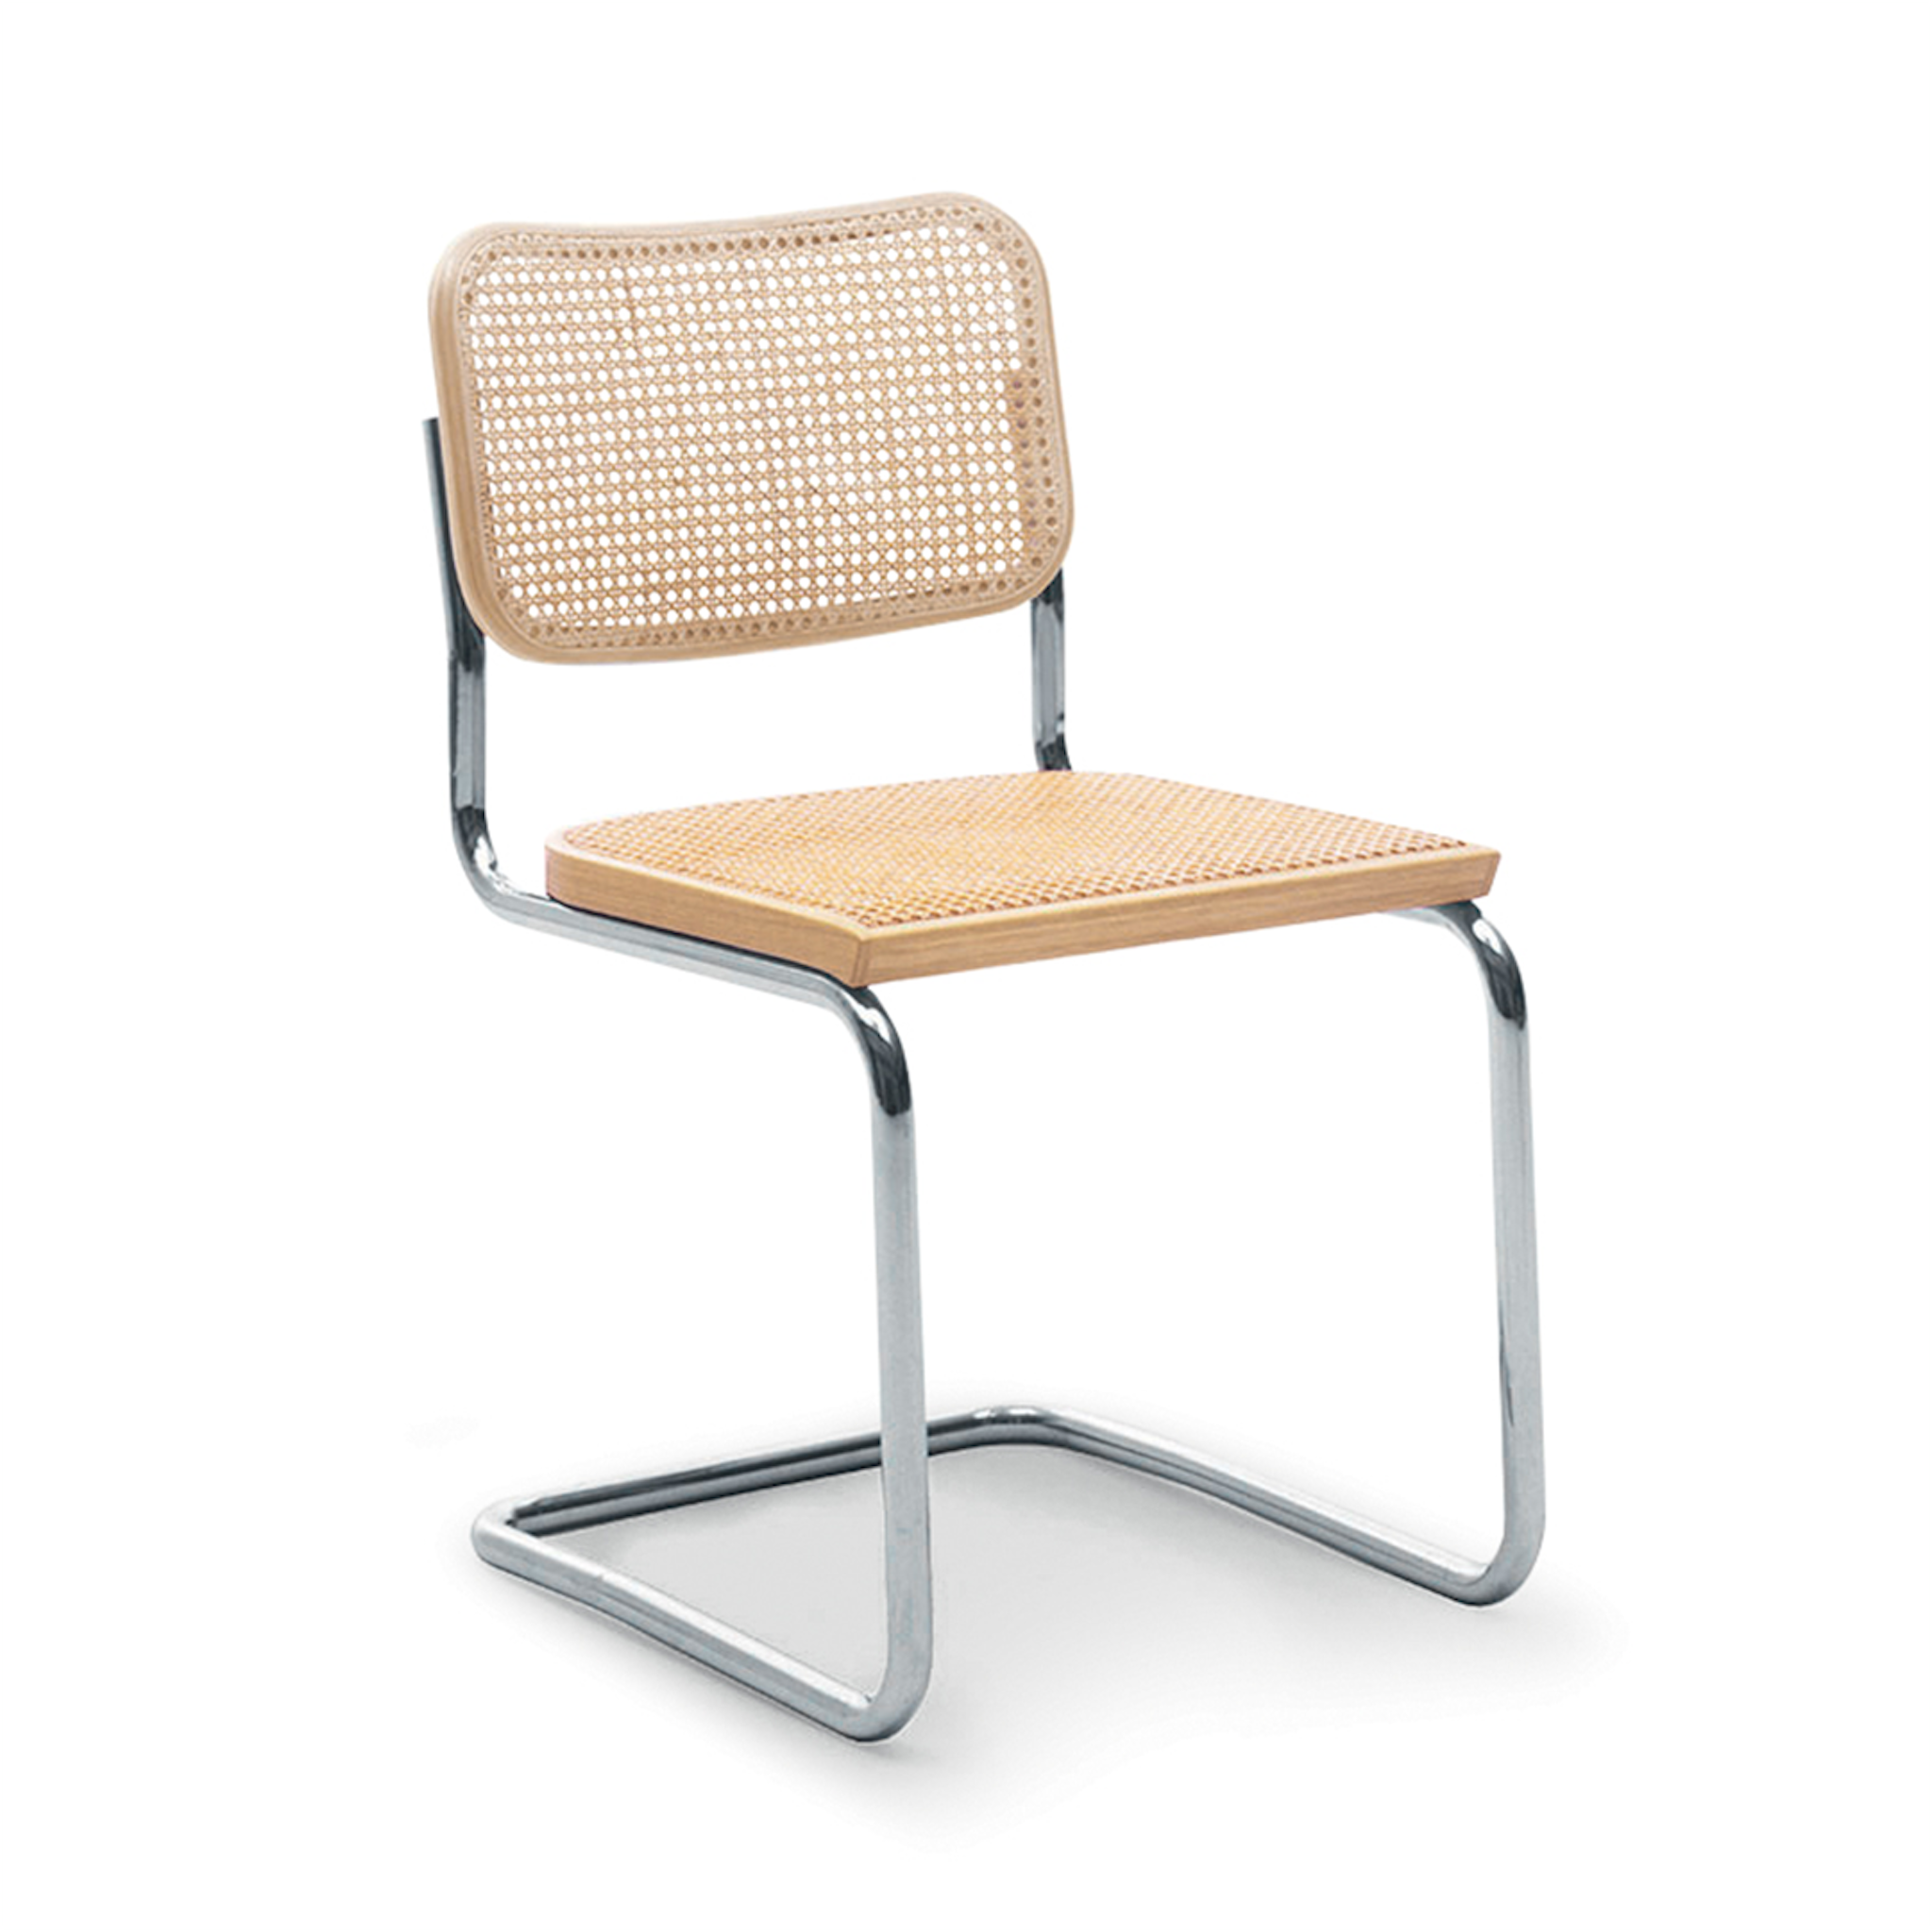 Cesca Chair Contract by Knoll